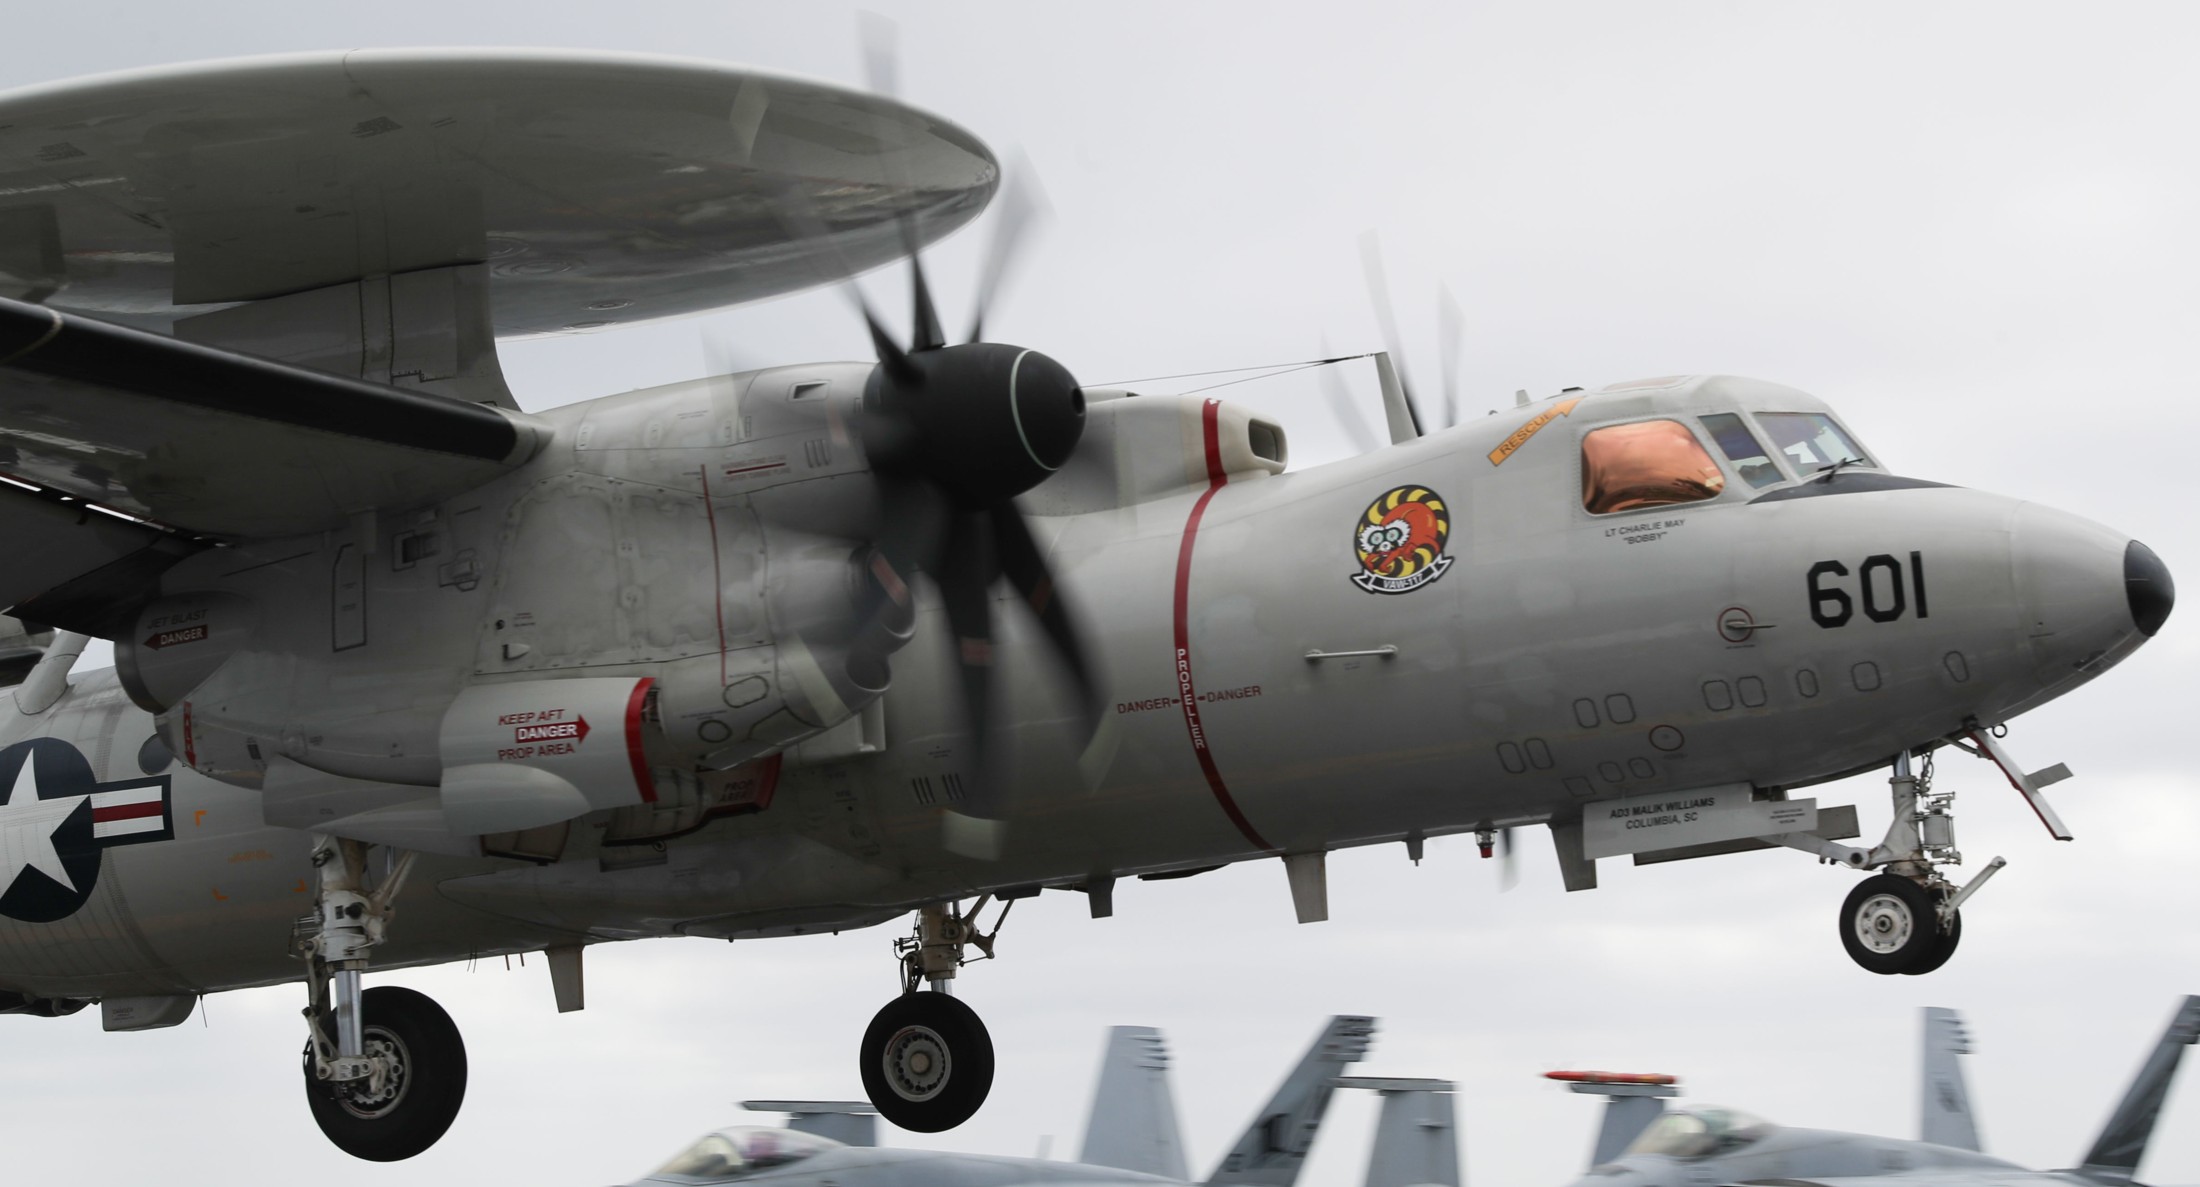 vaw-117 wallbangers airborne command and control squadron navy e-2d advanced advanced hawkeye cvw-9 uss abraham lincoln cvn-72 36